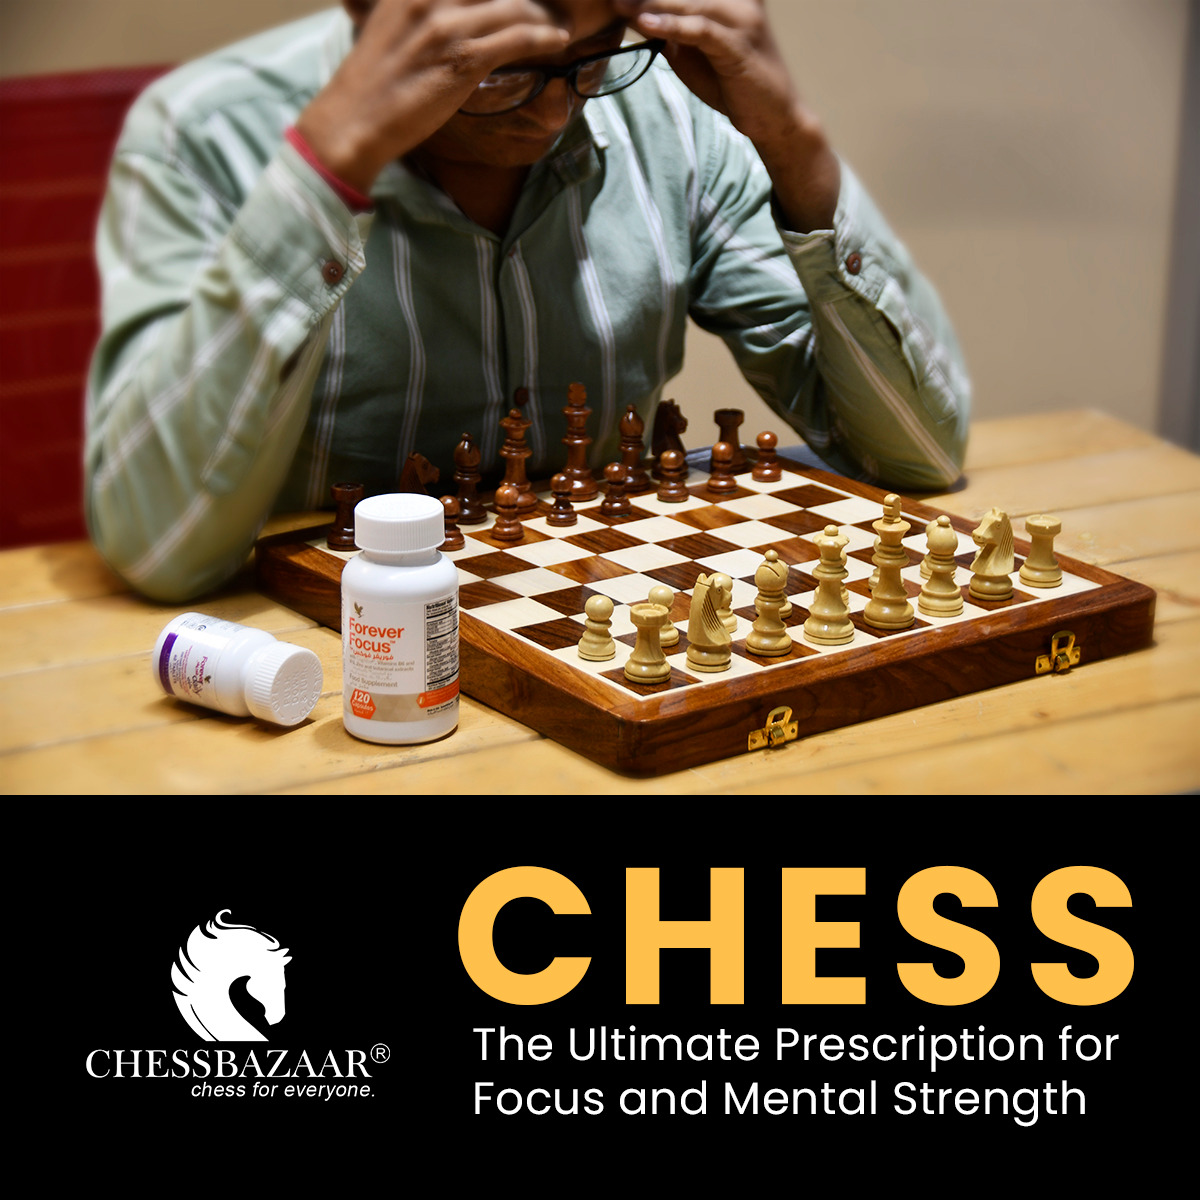 Is Chess for Everyone?